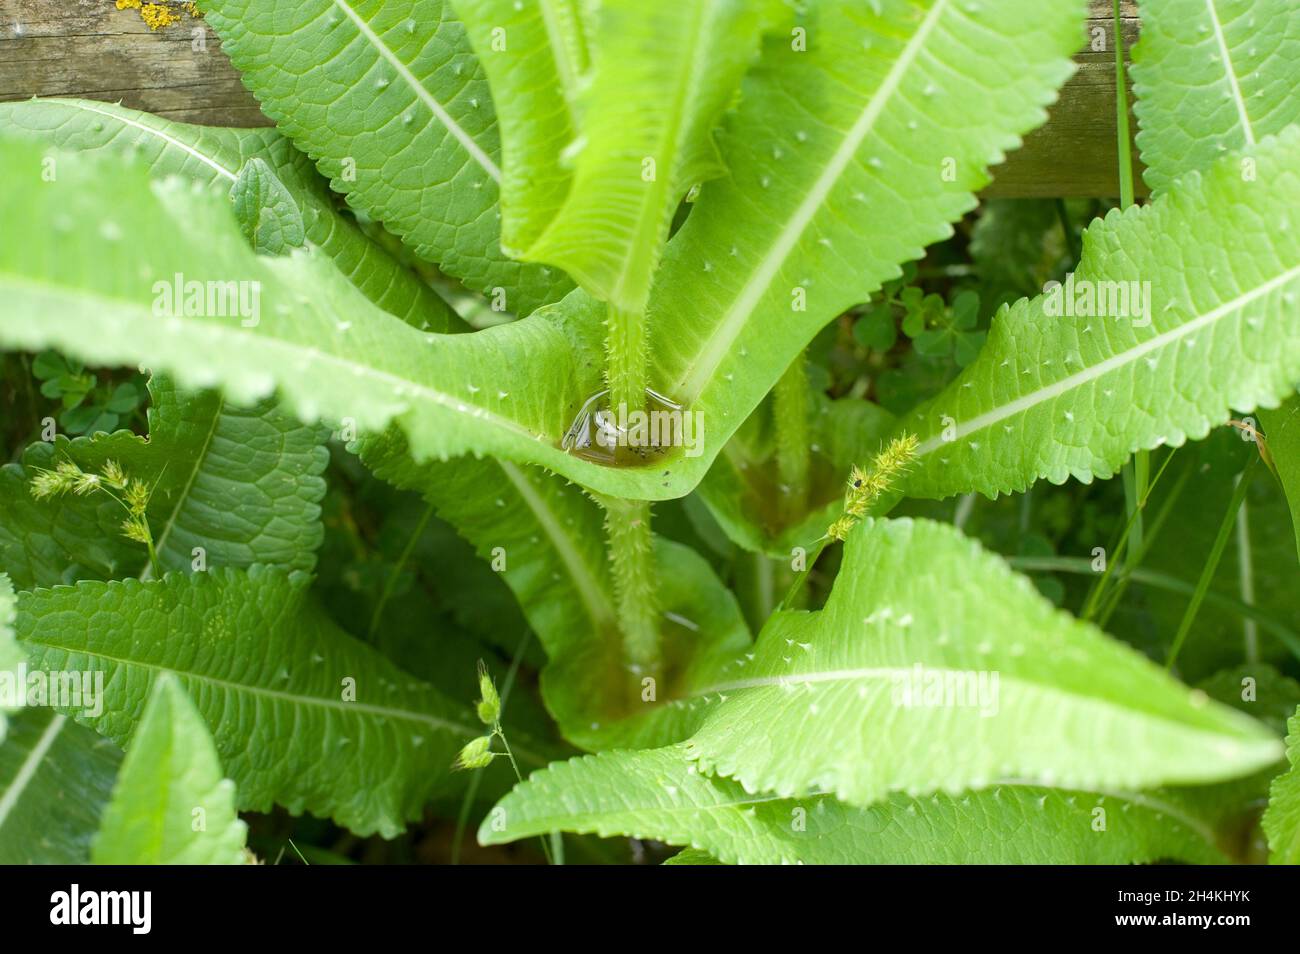 Wild teasel or fuller's teasel (Dipsacus fullonum) is a biennial spiny plant native to Europe and northern Africa. Detail of leaves perhaps with Stock Photo